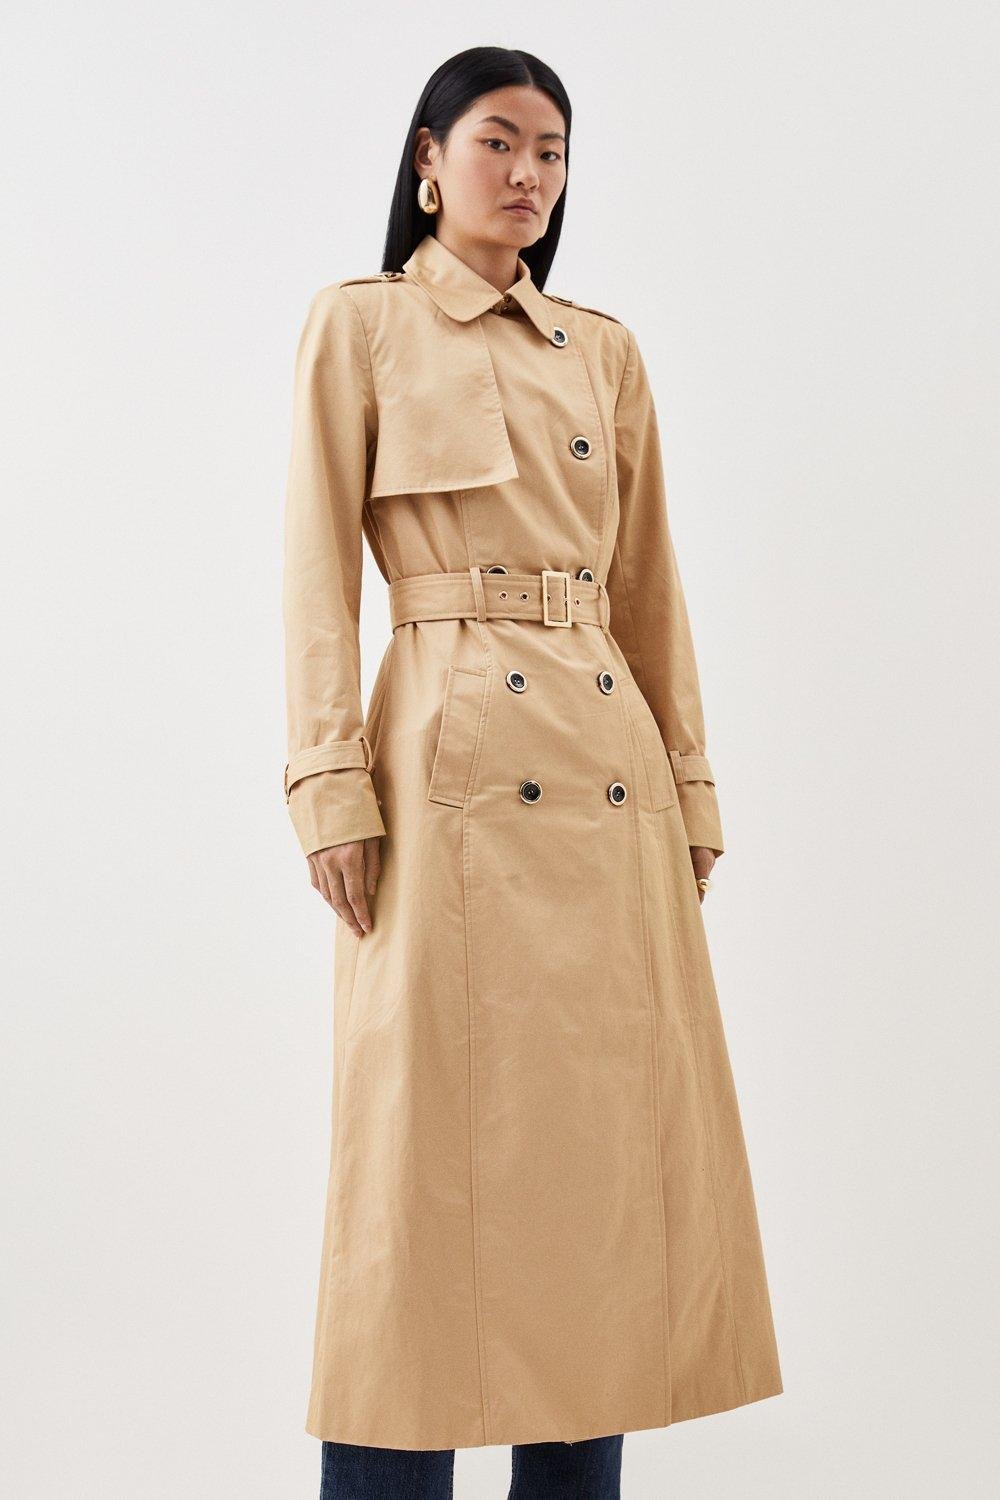 Camel GG-canvas leather-trim trench coat, Gucci